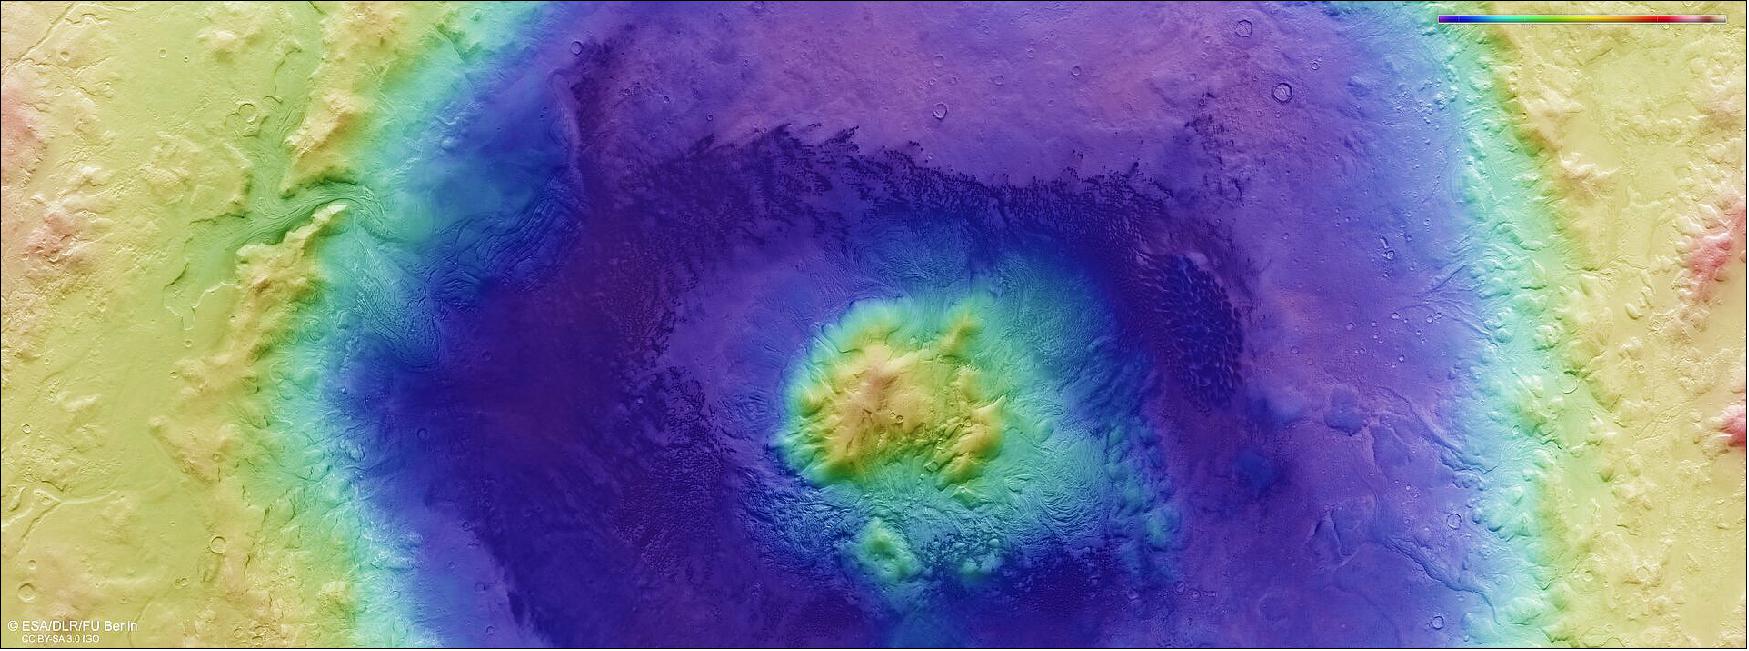 Figure 97: This color-coded topographic image shows a feature on Mars’ surface named Moreux crater, based on data gathered by the Mars Express High Resolution Stereo Camera on 30 October 2019 during orbit 20014. This view is based on a digital terrain model (DTM) of the region, from which the topography of the landscape can be derived; lower parts of the surface are shown in blues and purples, while higher altitude regions show up in whites, yellows and reds, as indicated on the scale to the bottom left. North is to the right (image credit: ESA/DLR/FU Berlin, CC BY-SA 3.0 IGO)